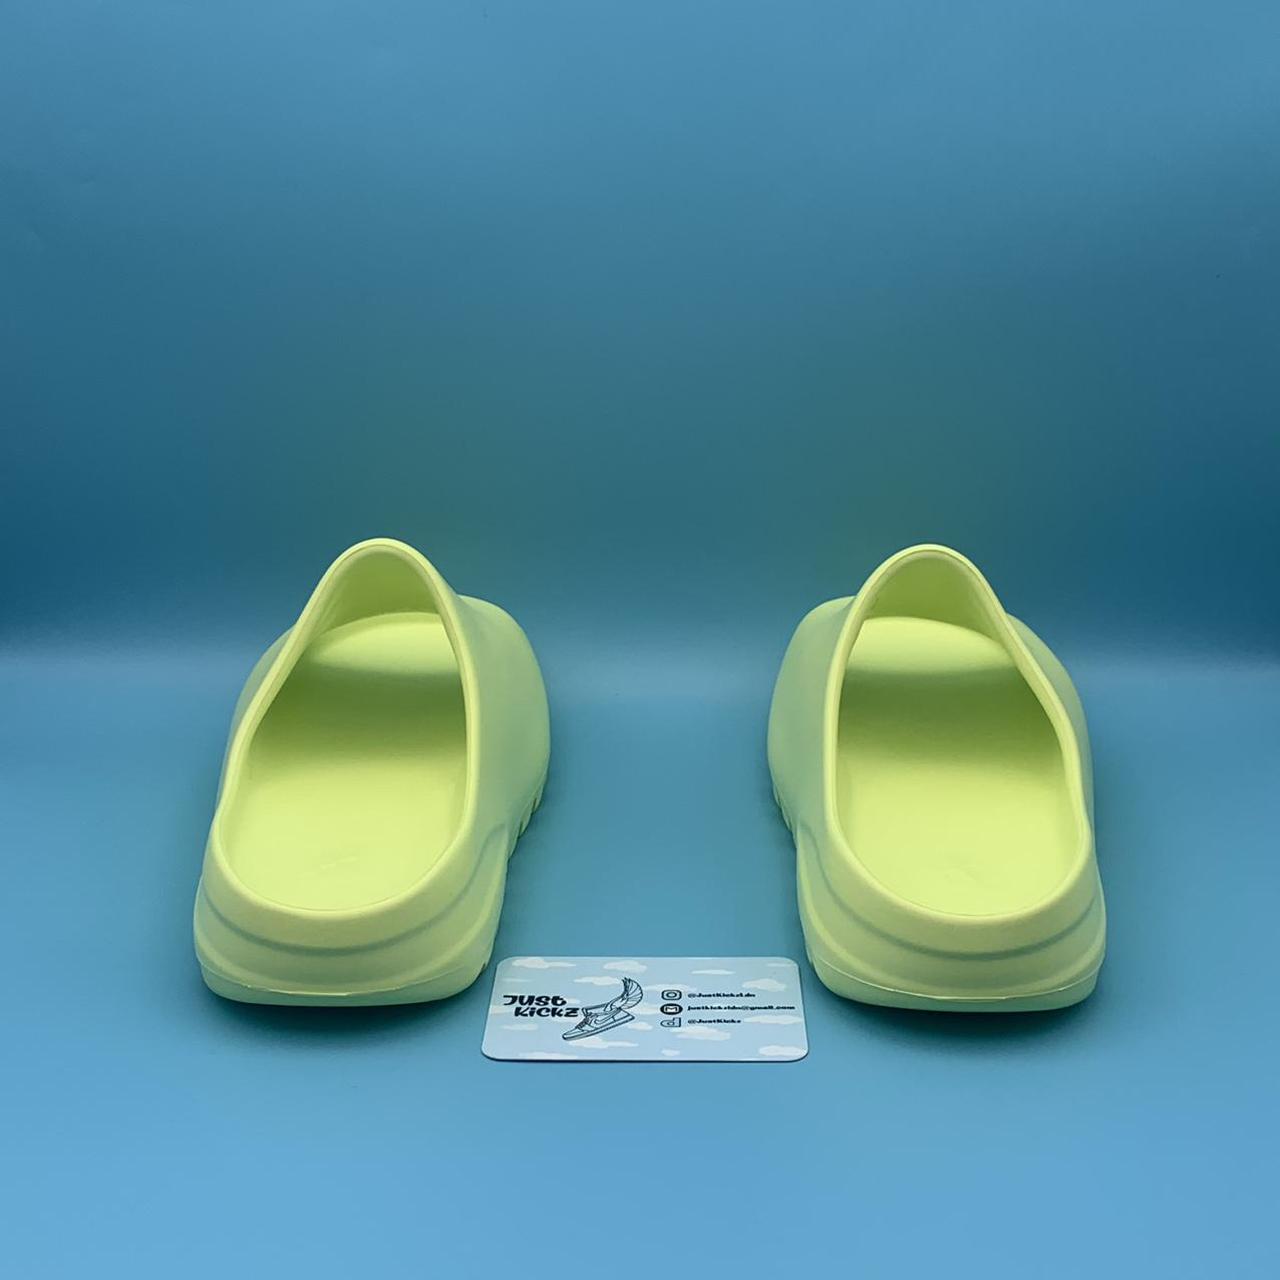 Product Image 4 - Yeezy Slide ‘Glow Green’

Condition: Brand